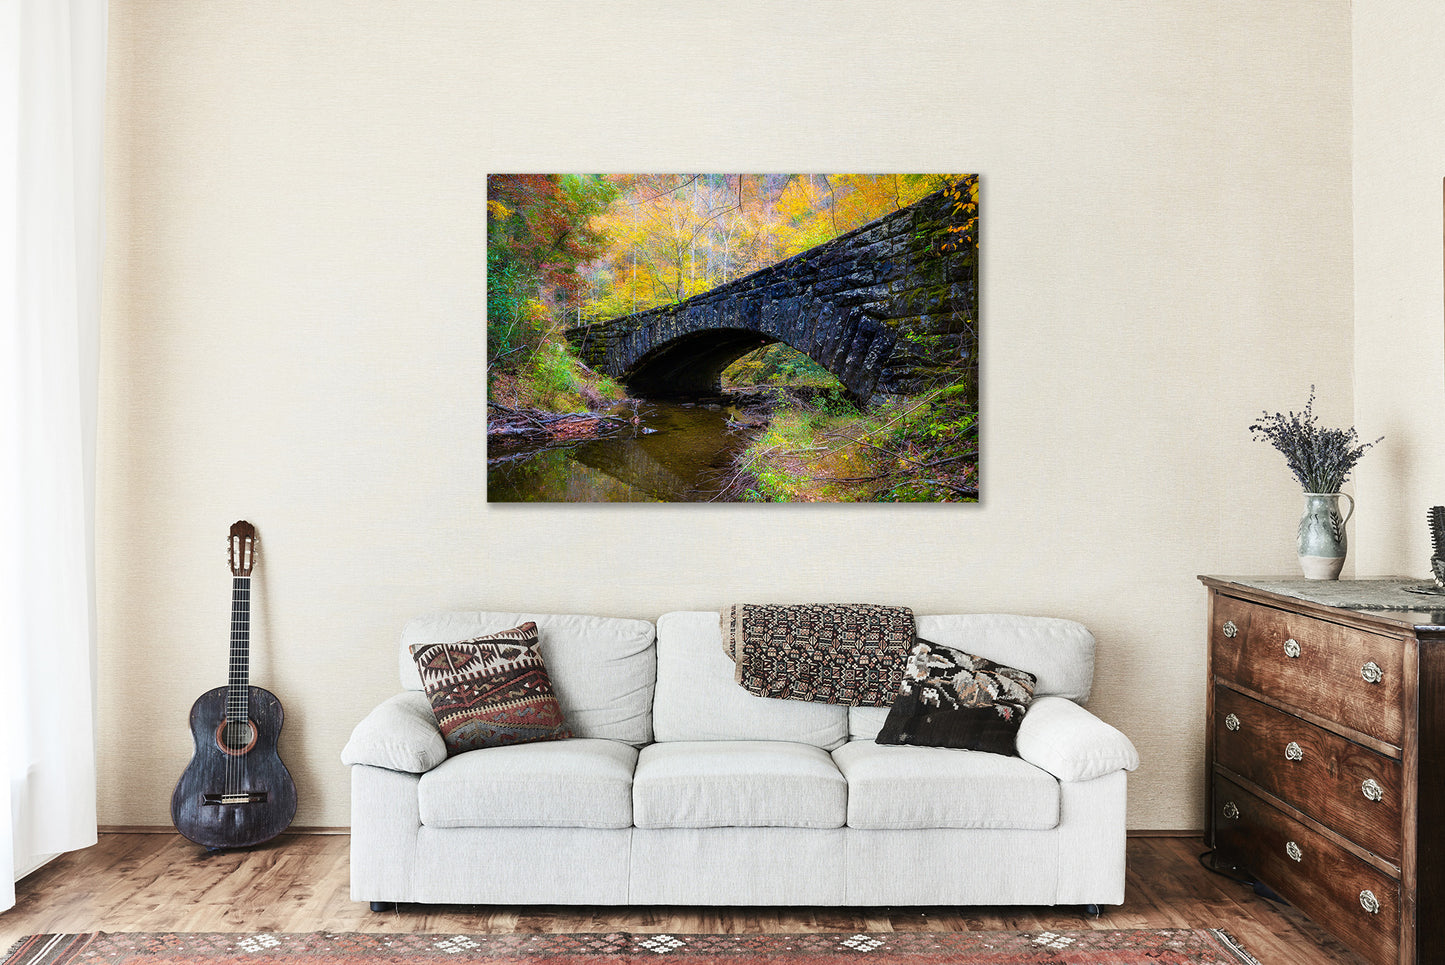 Great Smoky Mountains Canvas Wall Art (Ready to Hang) Gallery Wrap of Stone Bridge Over Laurel Creek Surrounded by Fall Color in Tennessee Forest Photography Country Decor